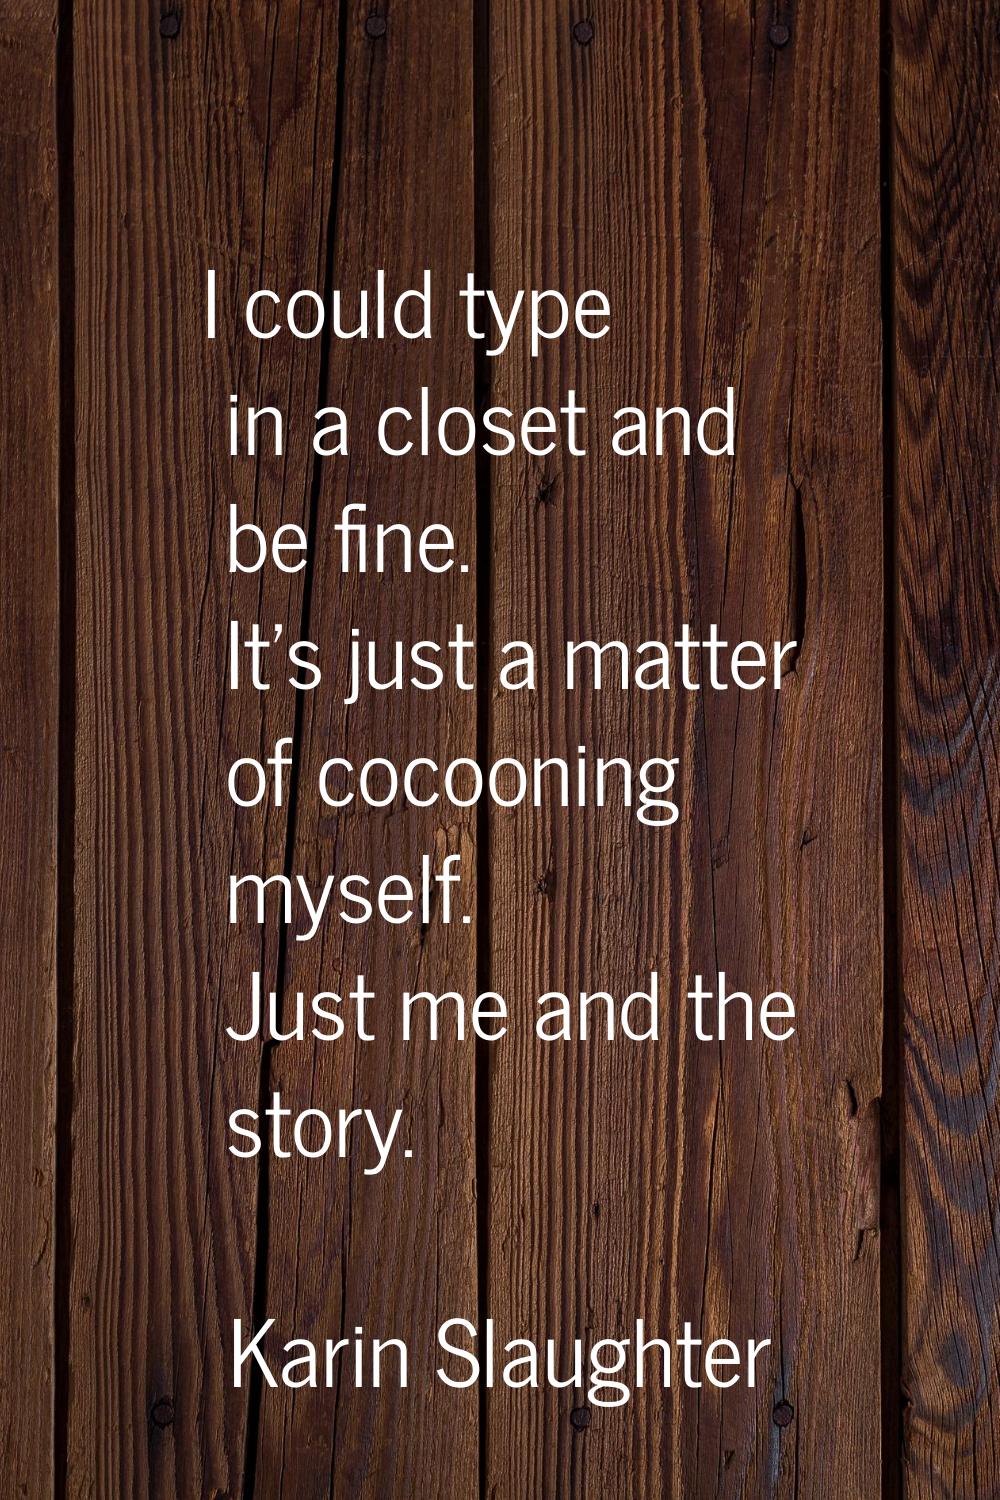 I could type in a closet and be fine. It's just a matter of cocooning myself. Just me and the story